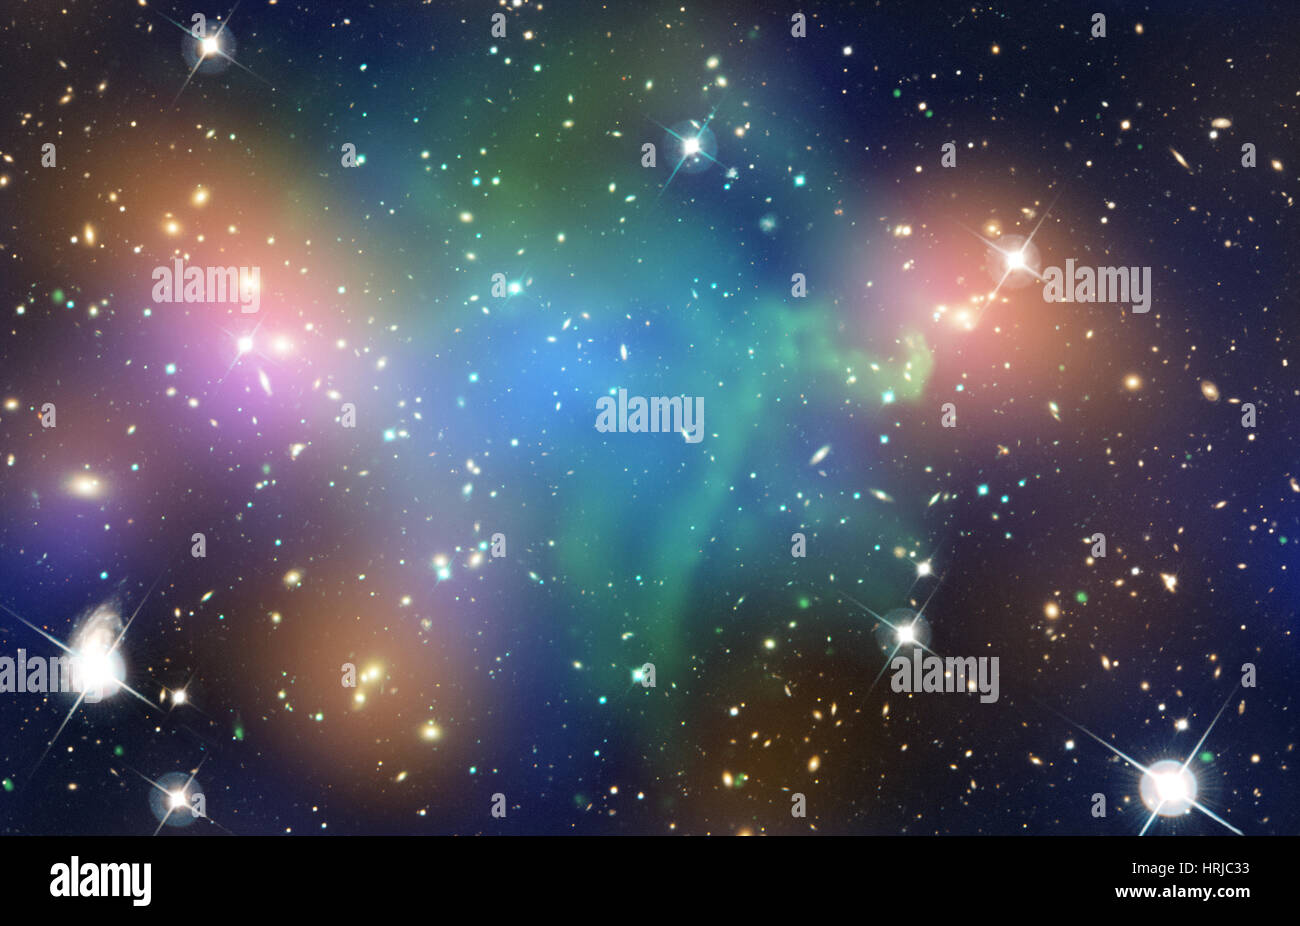 Abell 550, Galaxy Cluster, Composite Stock Photo